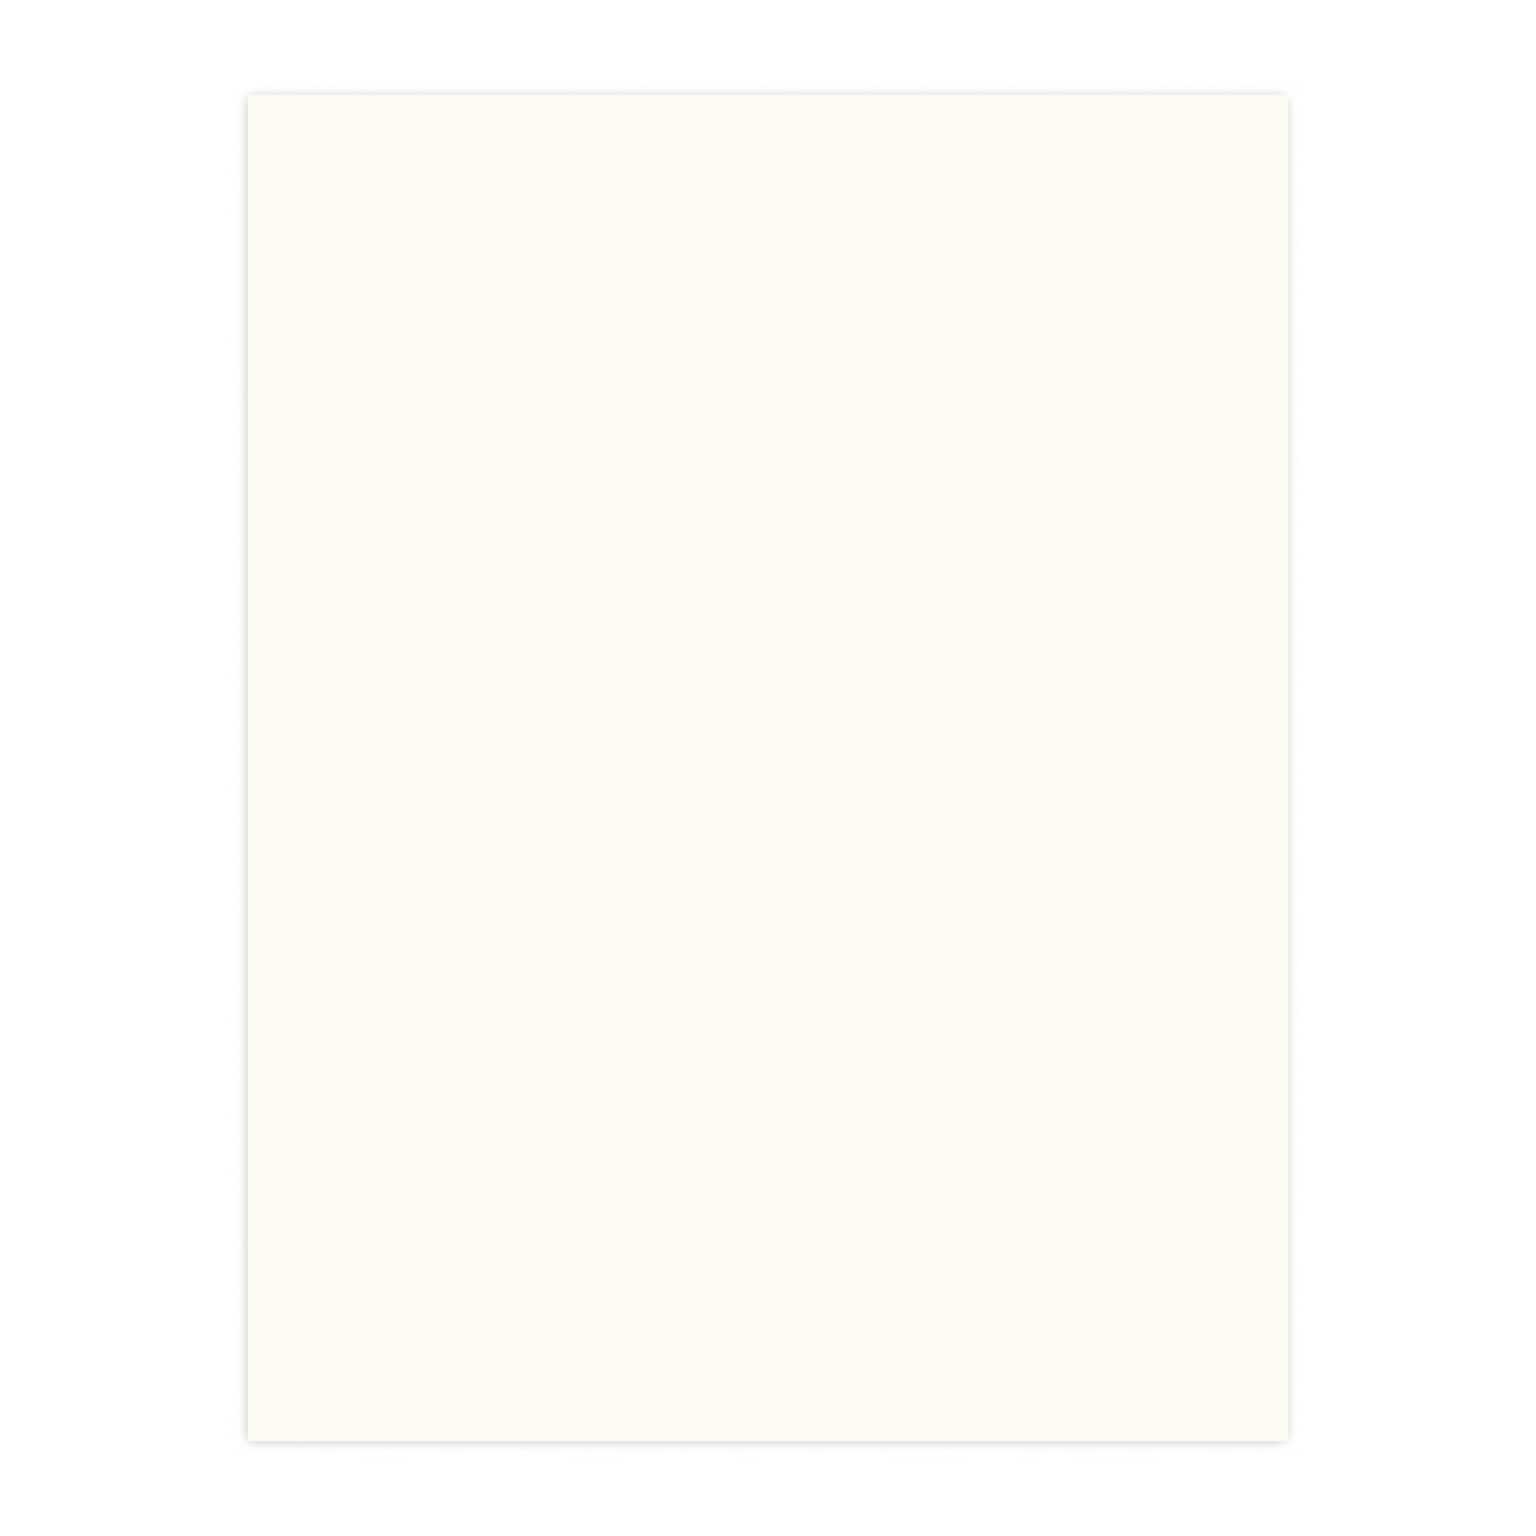 Blank 2nd Sheet Letterhead, 8.5 x 11, CLASSIC CREST® Natural White 24# Stock